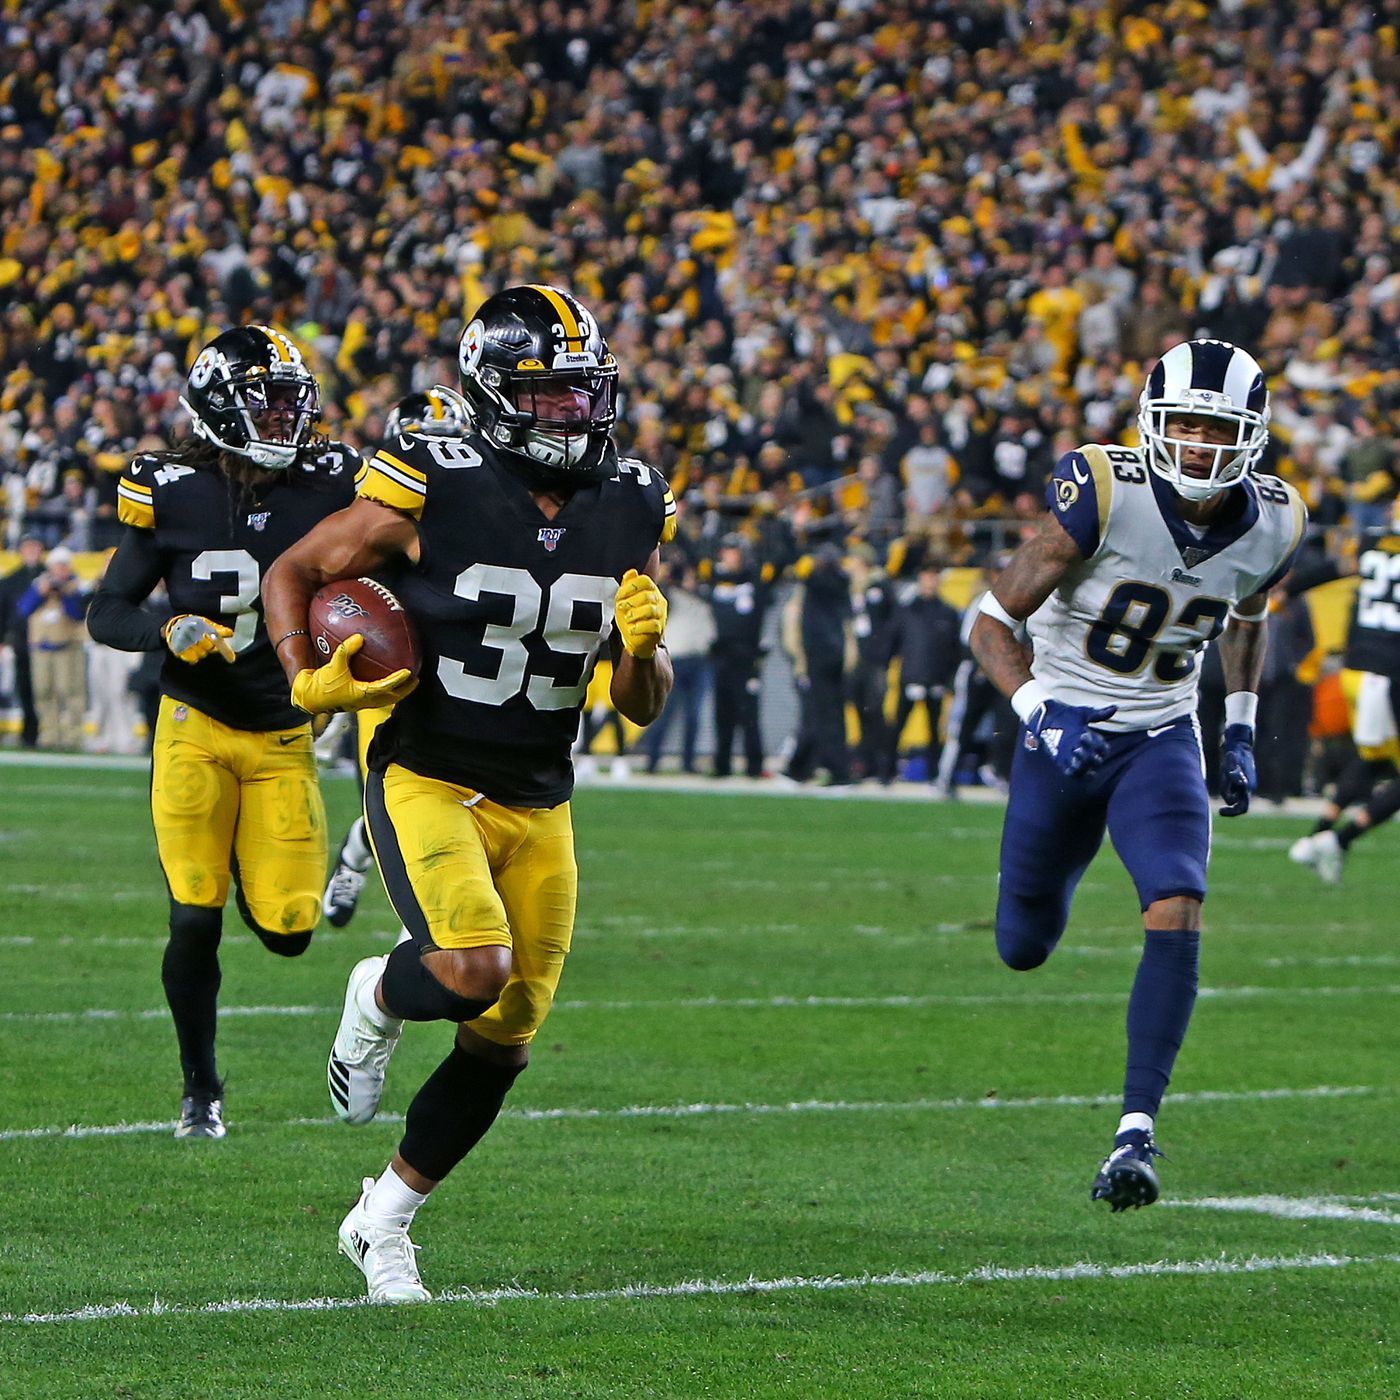 The Minkah Fitzpatrick Trade Officially Saved the Steelers' Season